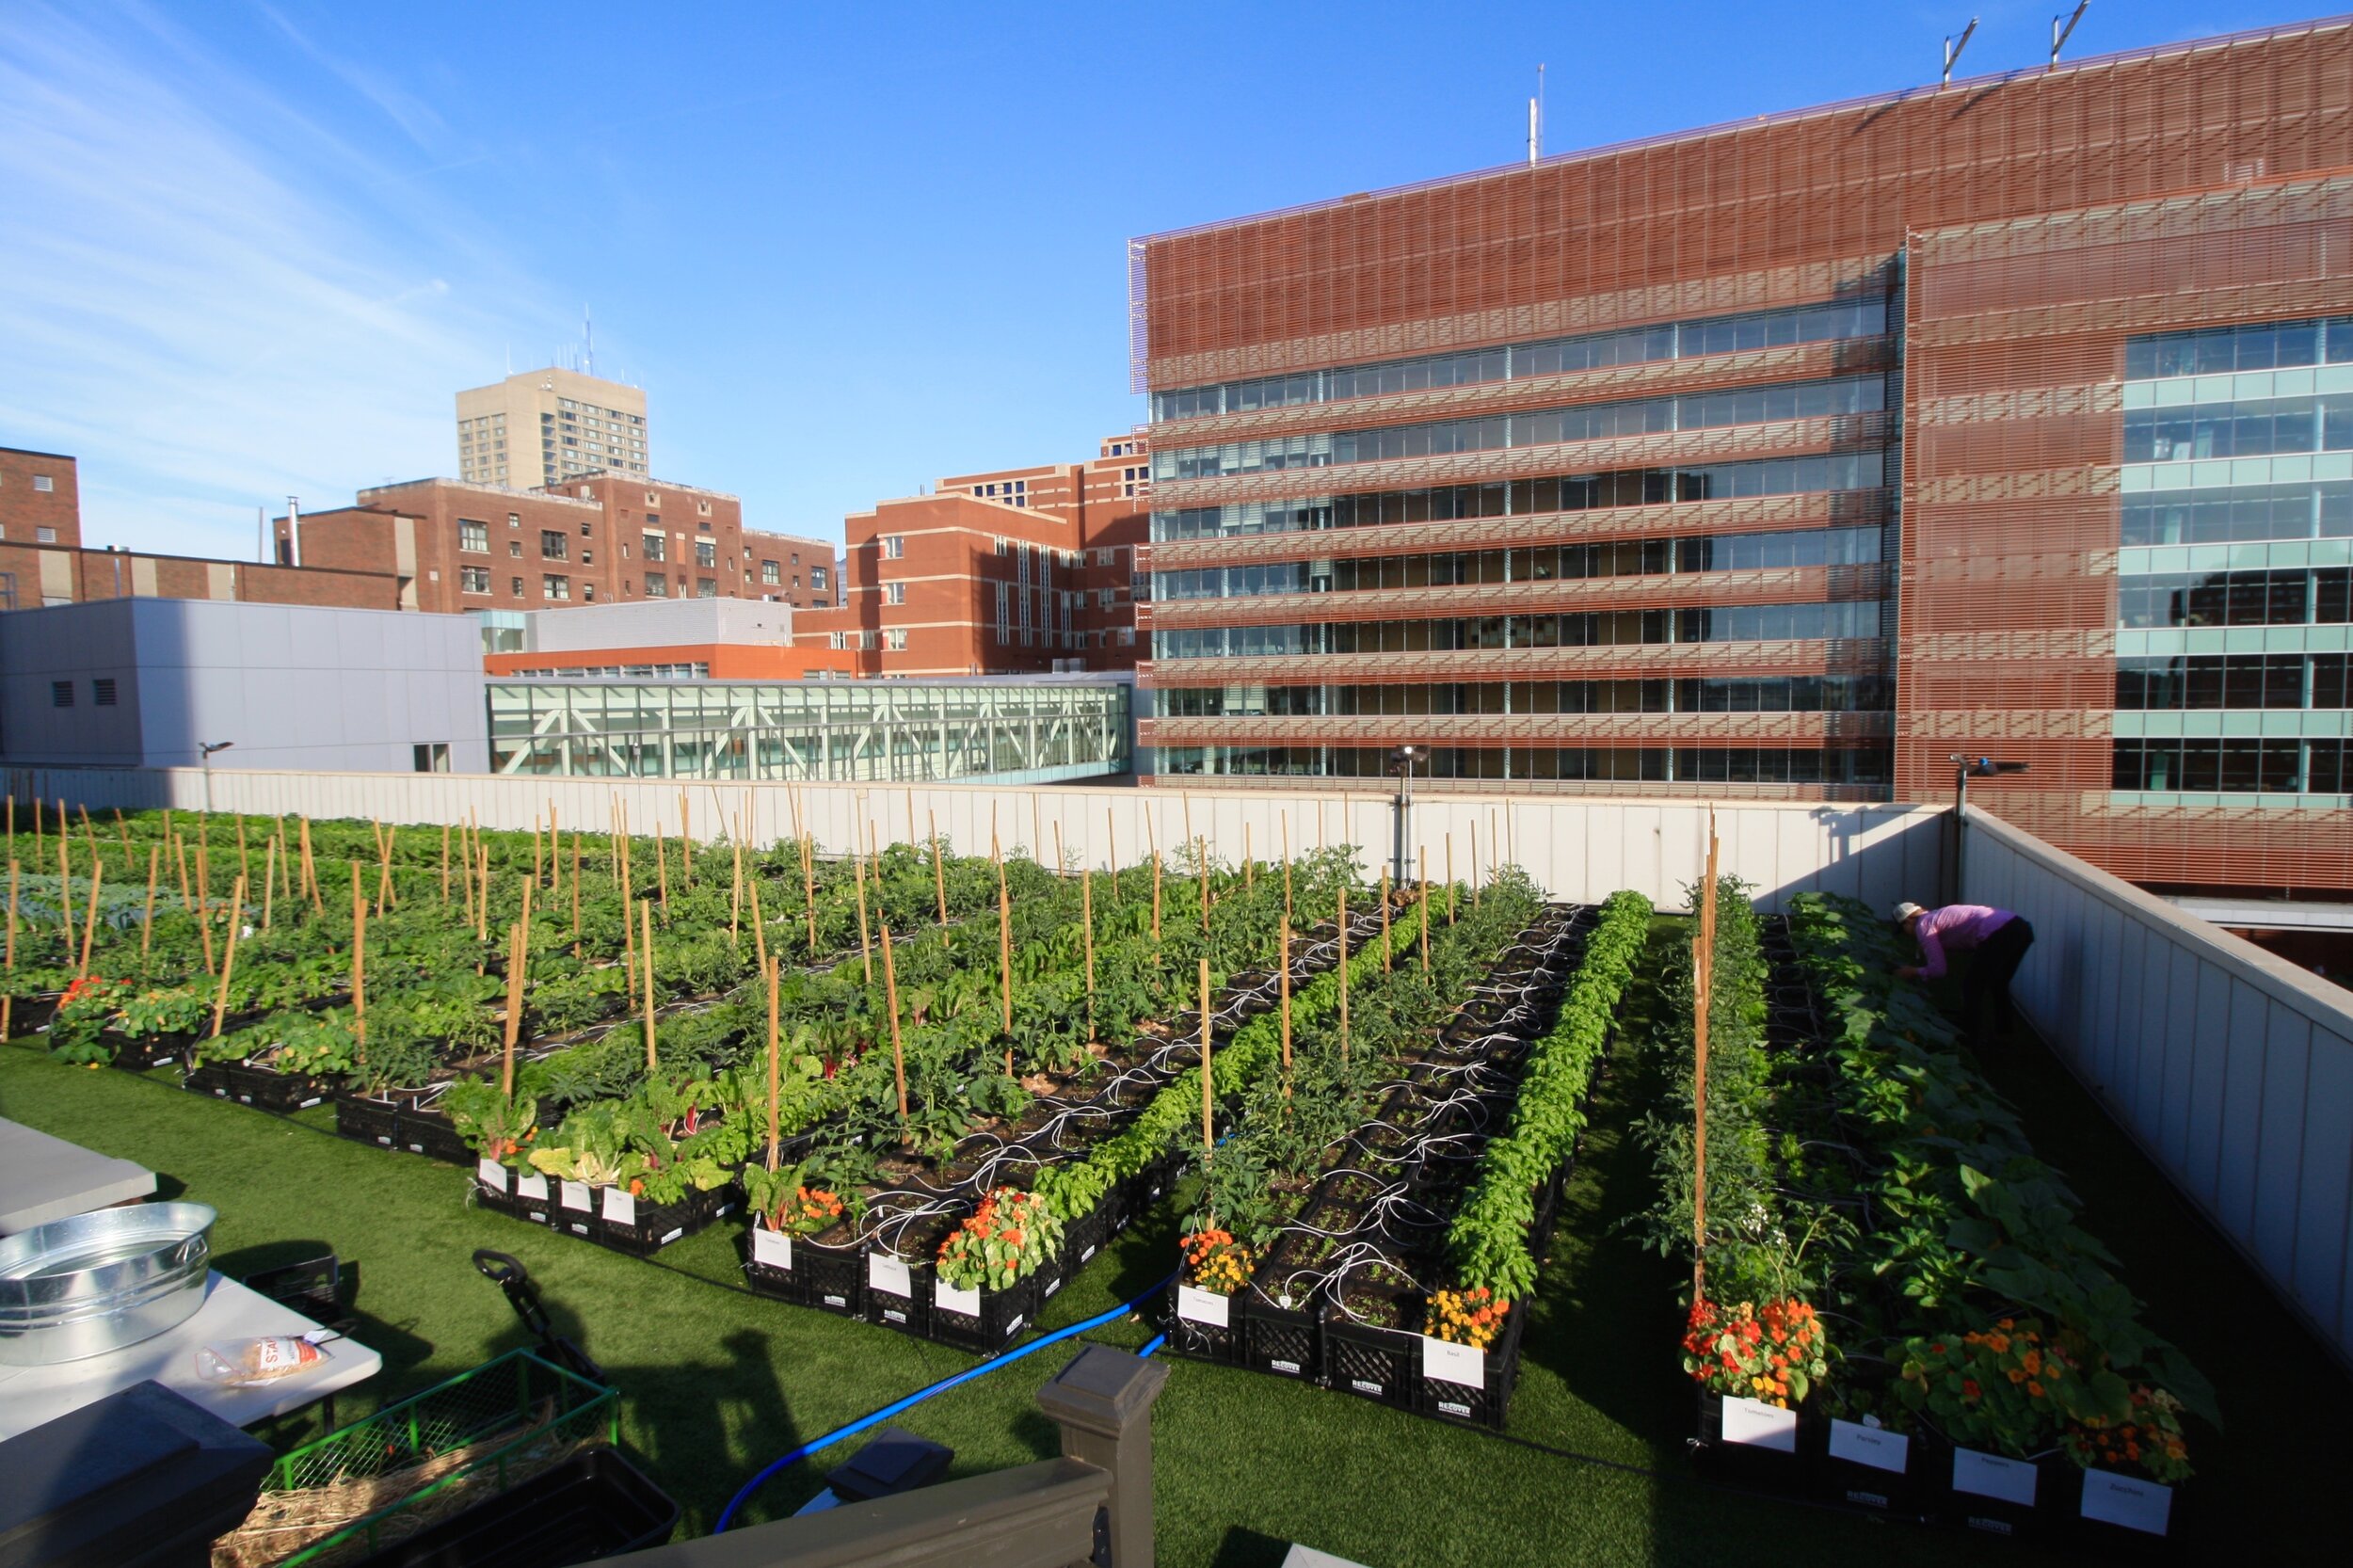 recover-green-roofs-bmc-rooftop-farm-2017-2.jpg